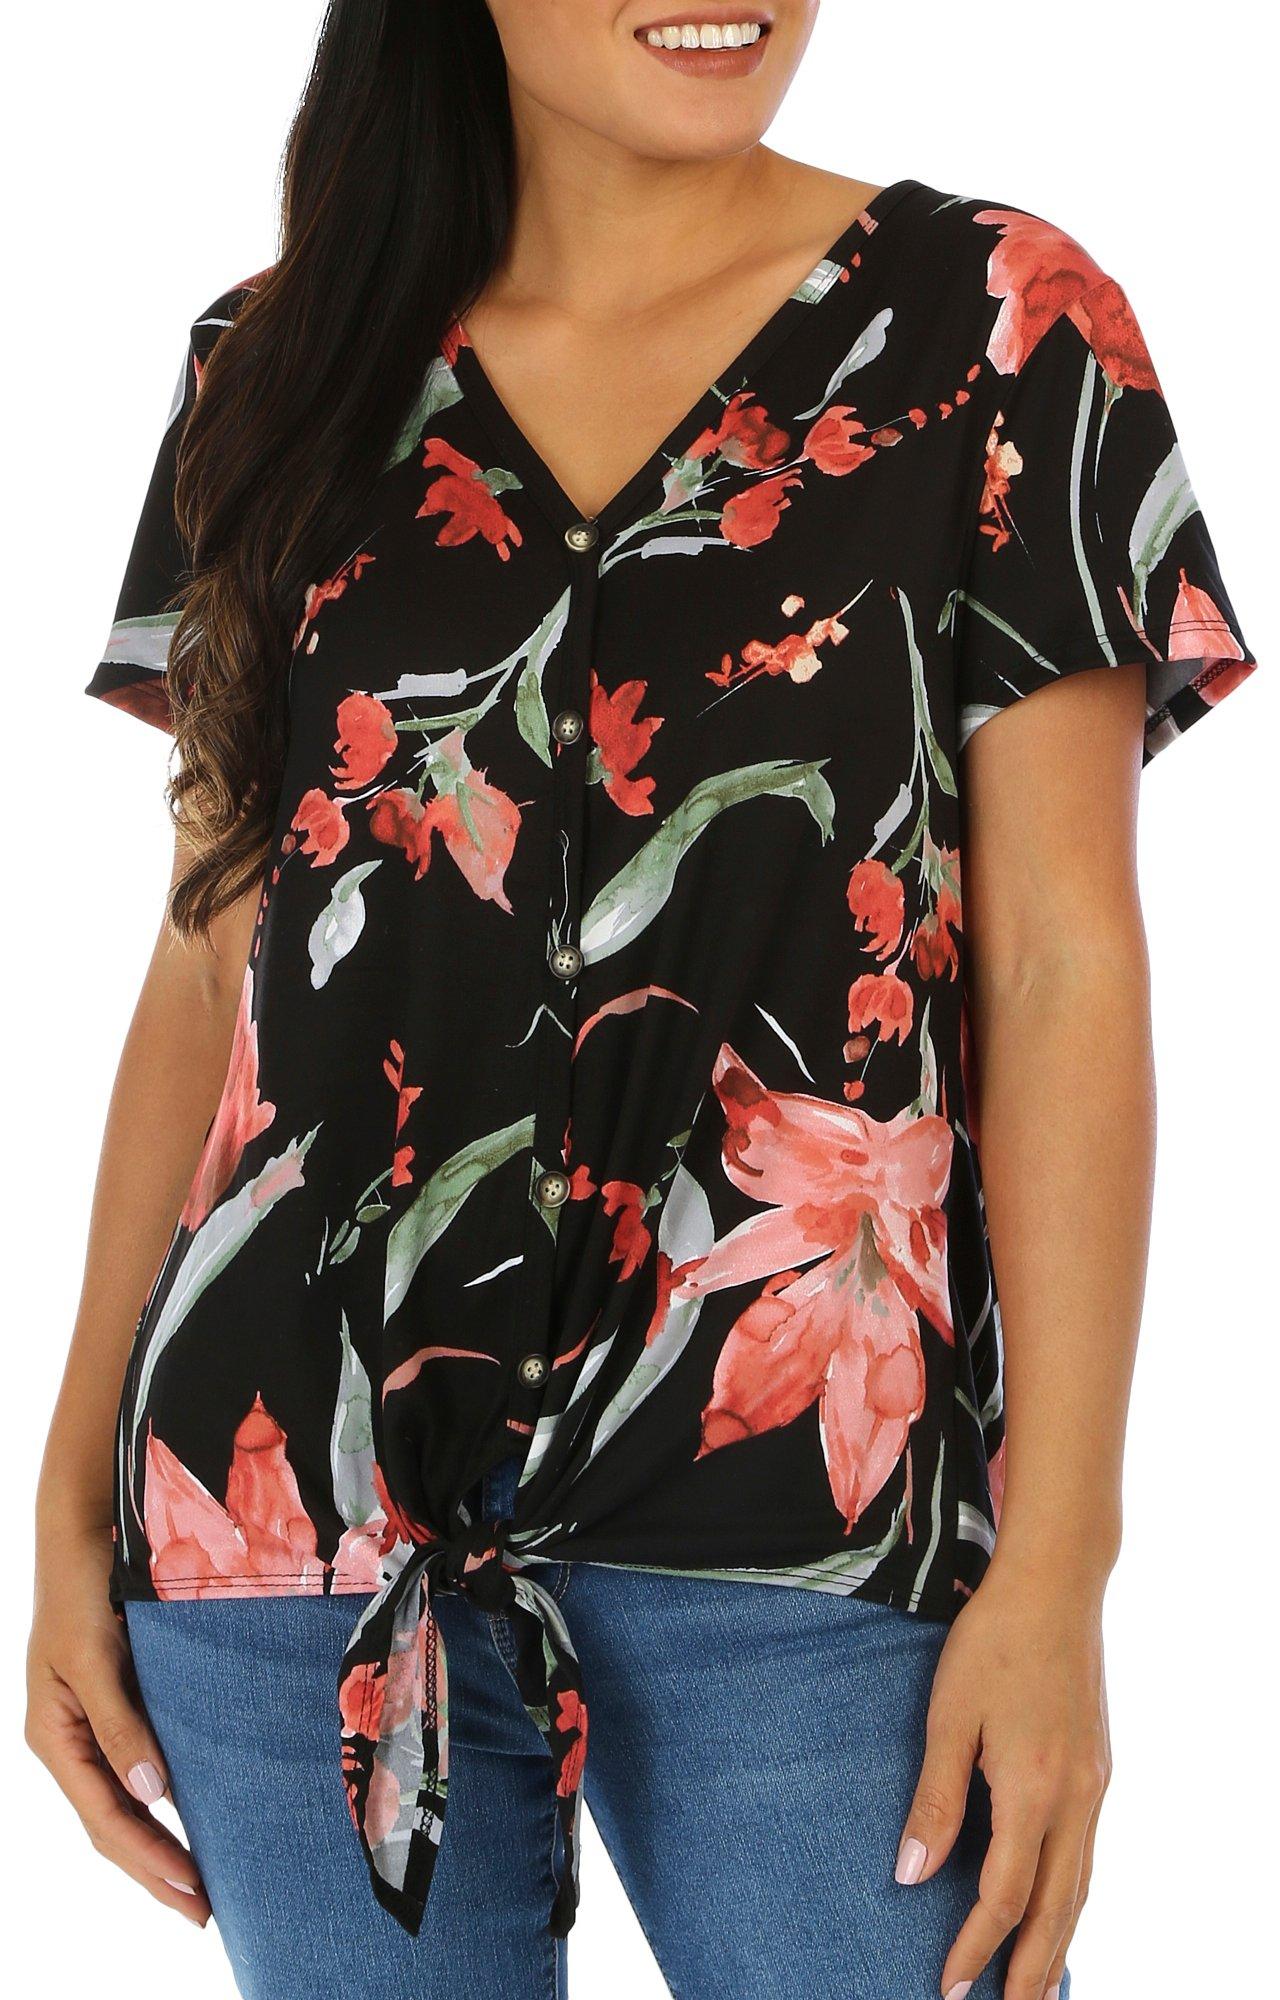 Juniper + Lime Womens Floral Front Tie Short Sleeve Top